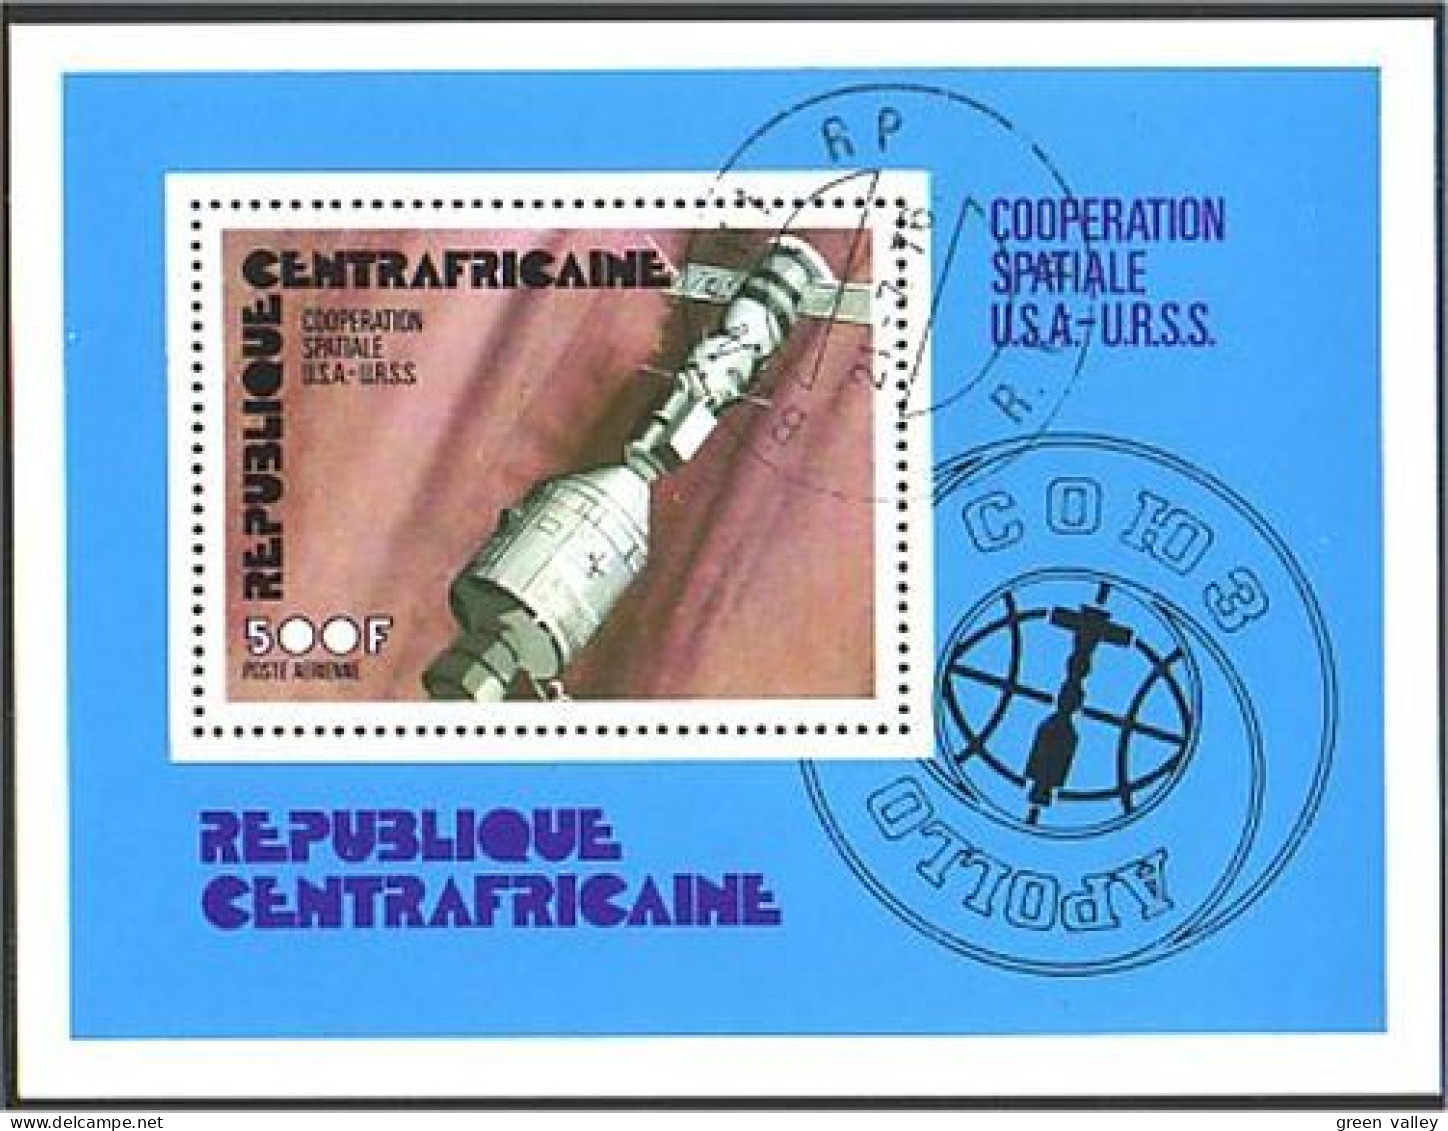 Centrafrique Cooperation Spatiale USA-URSS (A51-461) - Us Independence